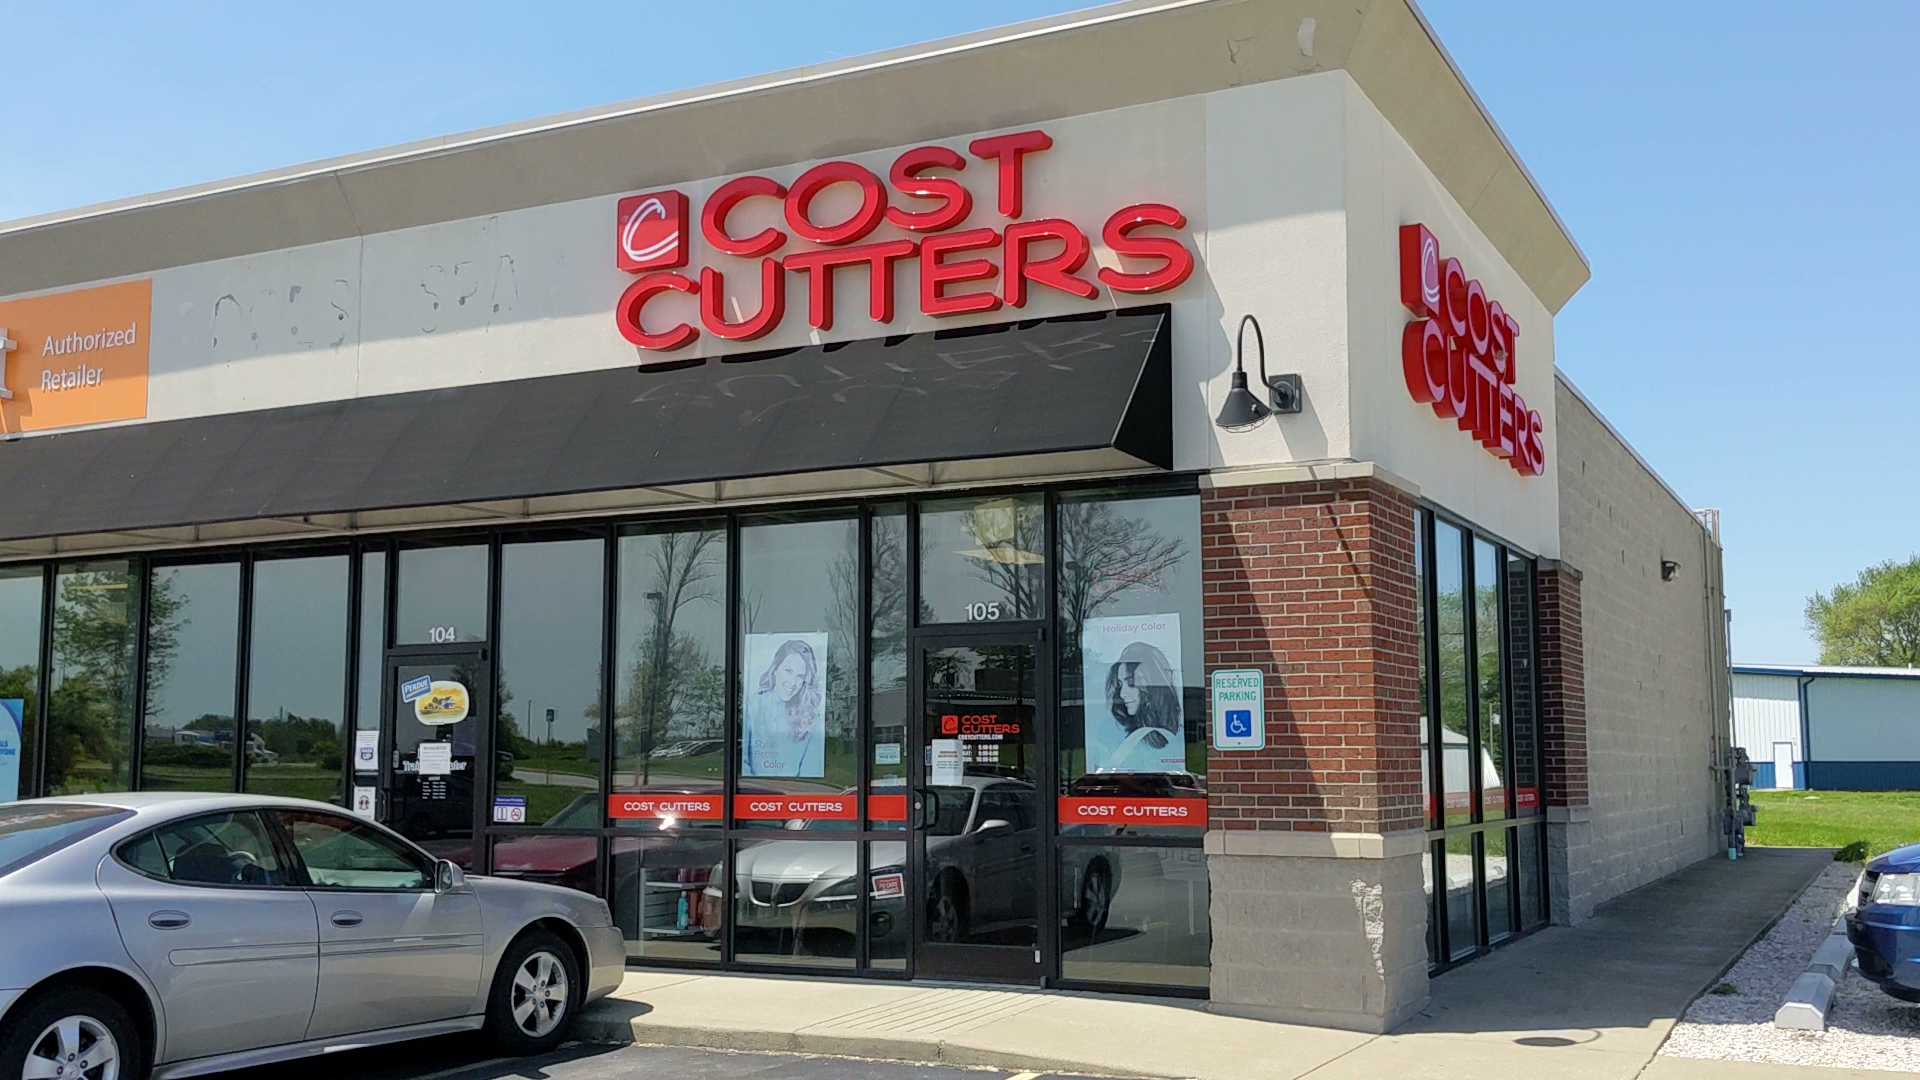 Cost Cutters 1735 IN-57 #105, Washington Indiana 47501